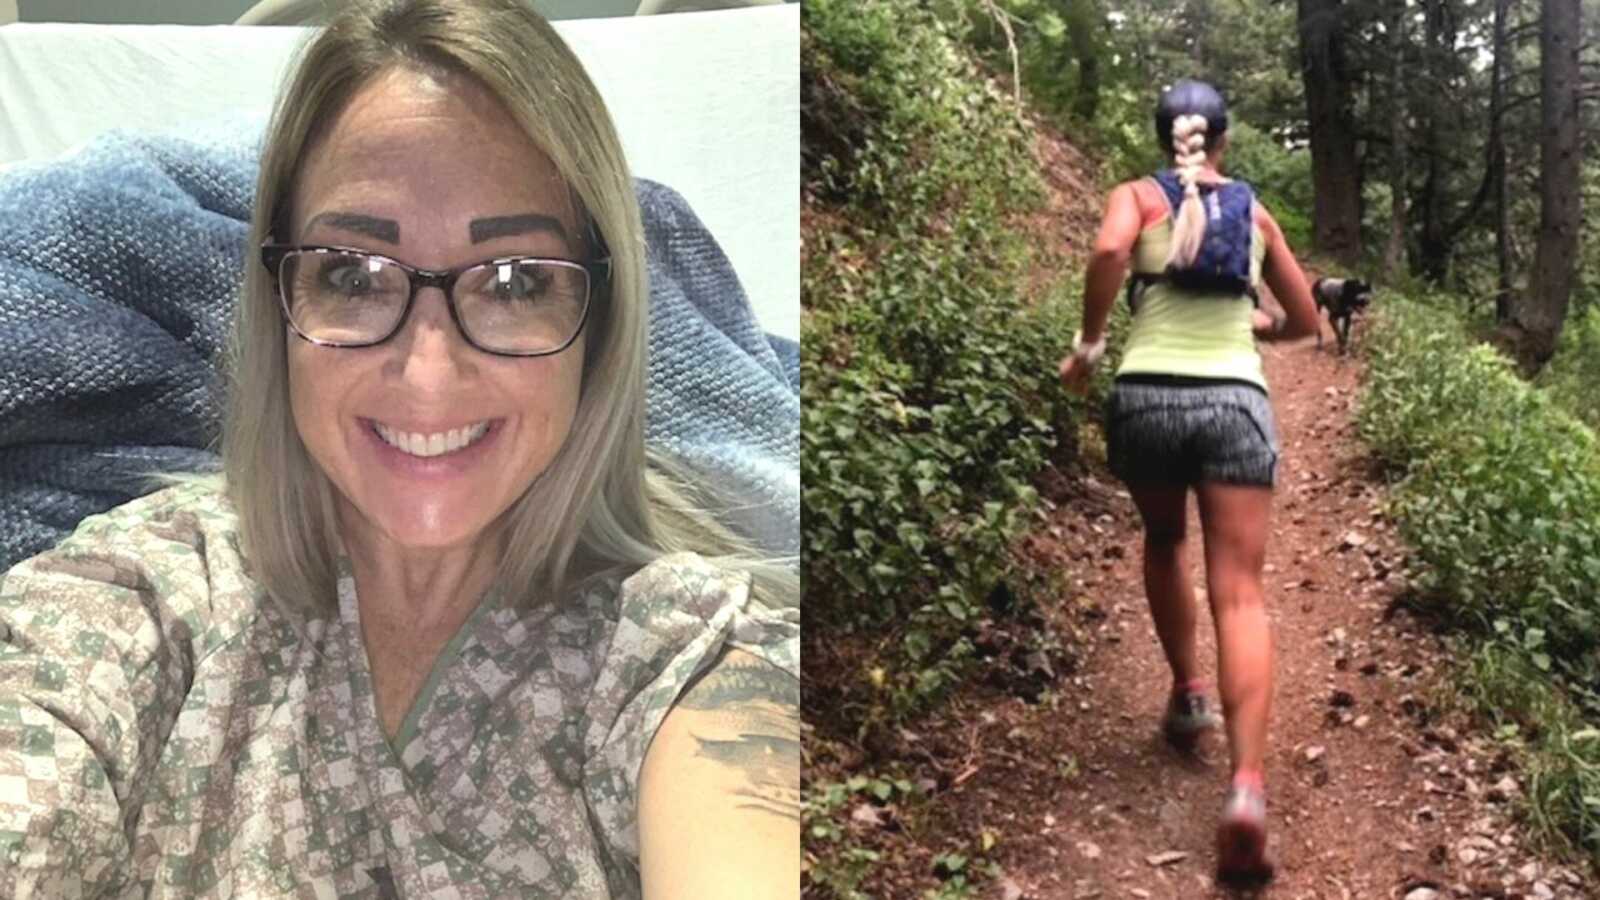 A woman wearing glasses in a hospital bed and a woman running on a forest path